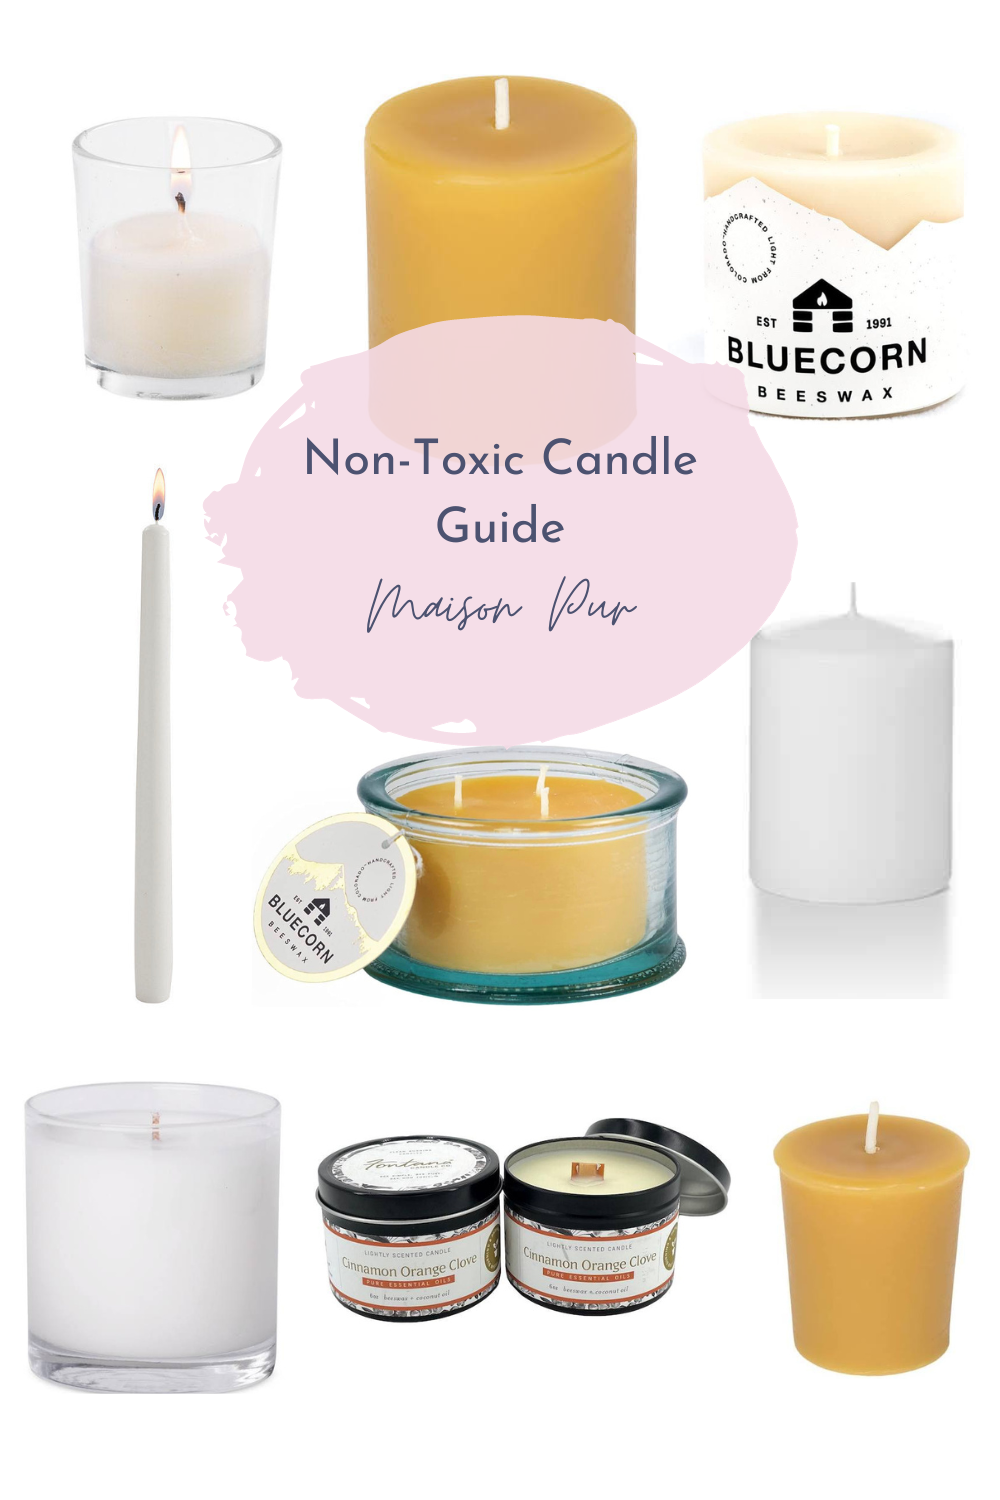 All Natural Candles Made From Soy Wax and 100% Essential Oils